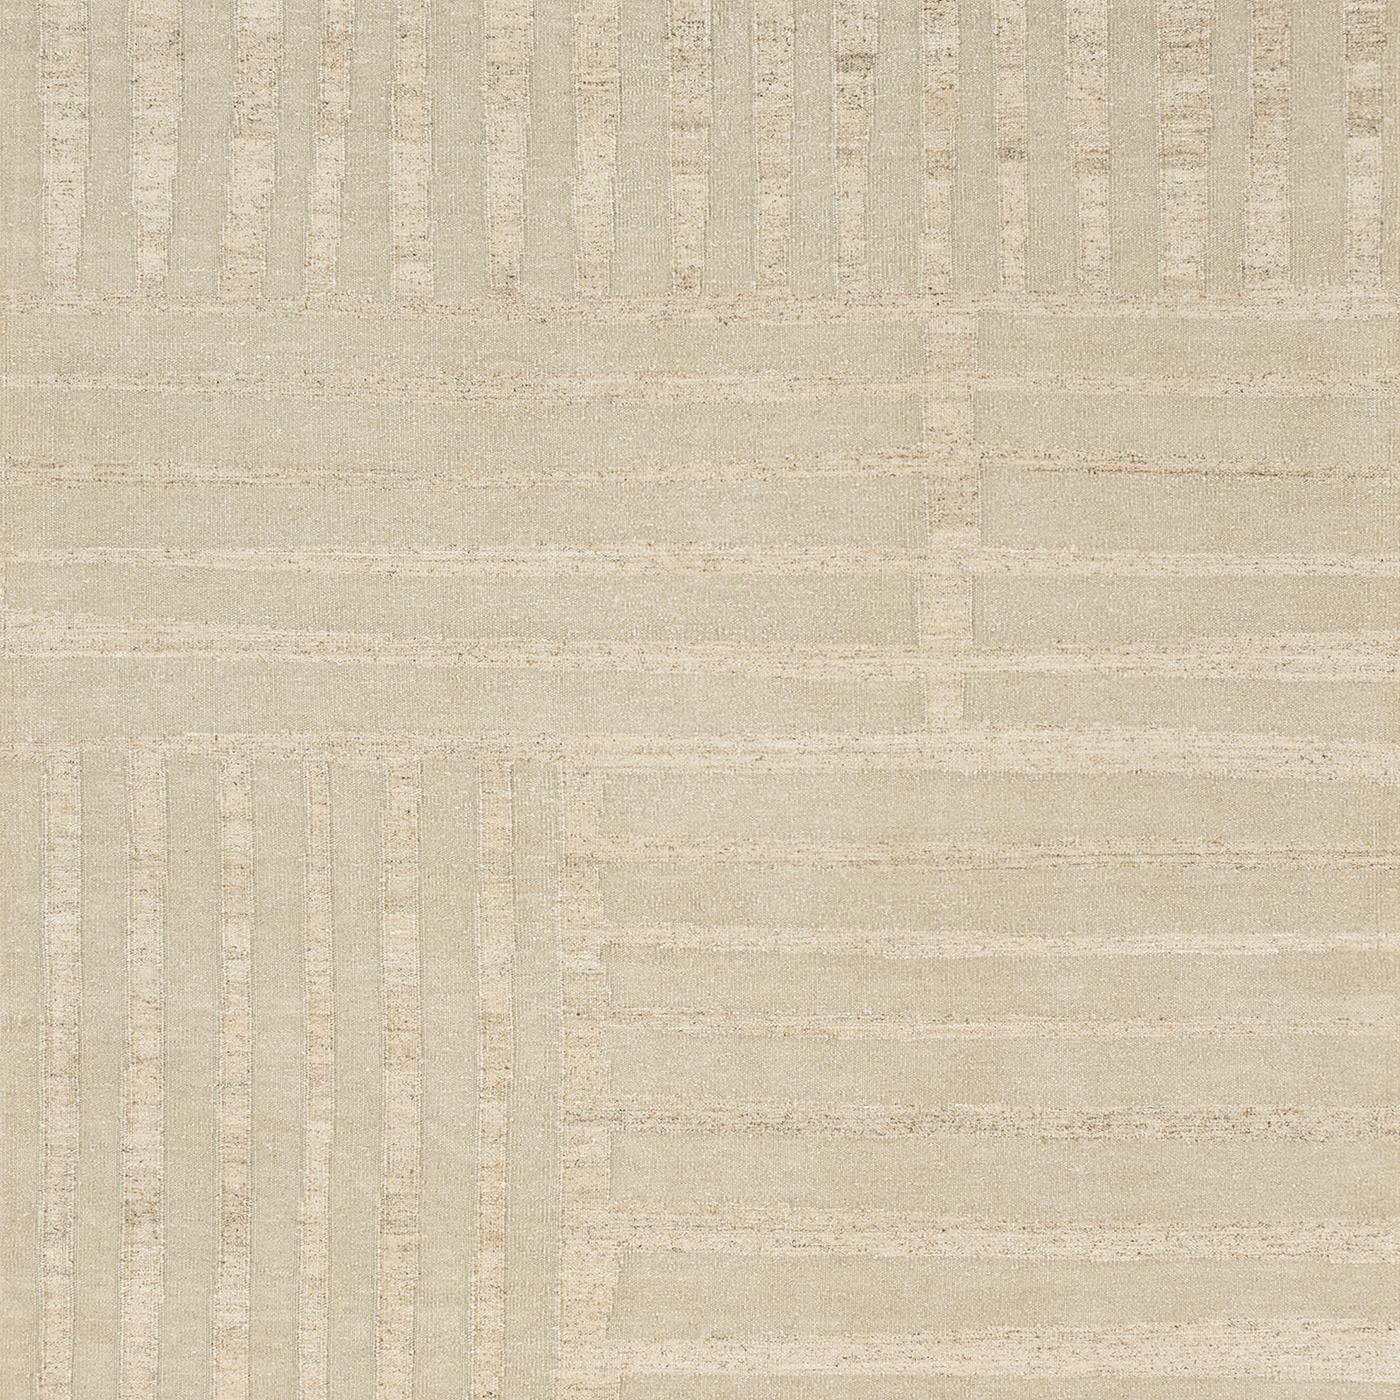 Nepalese Linen Nettle Stripe Natural Undyed Flatweave Rug by Knots Rugs